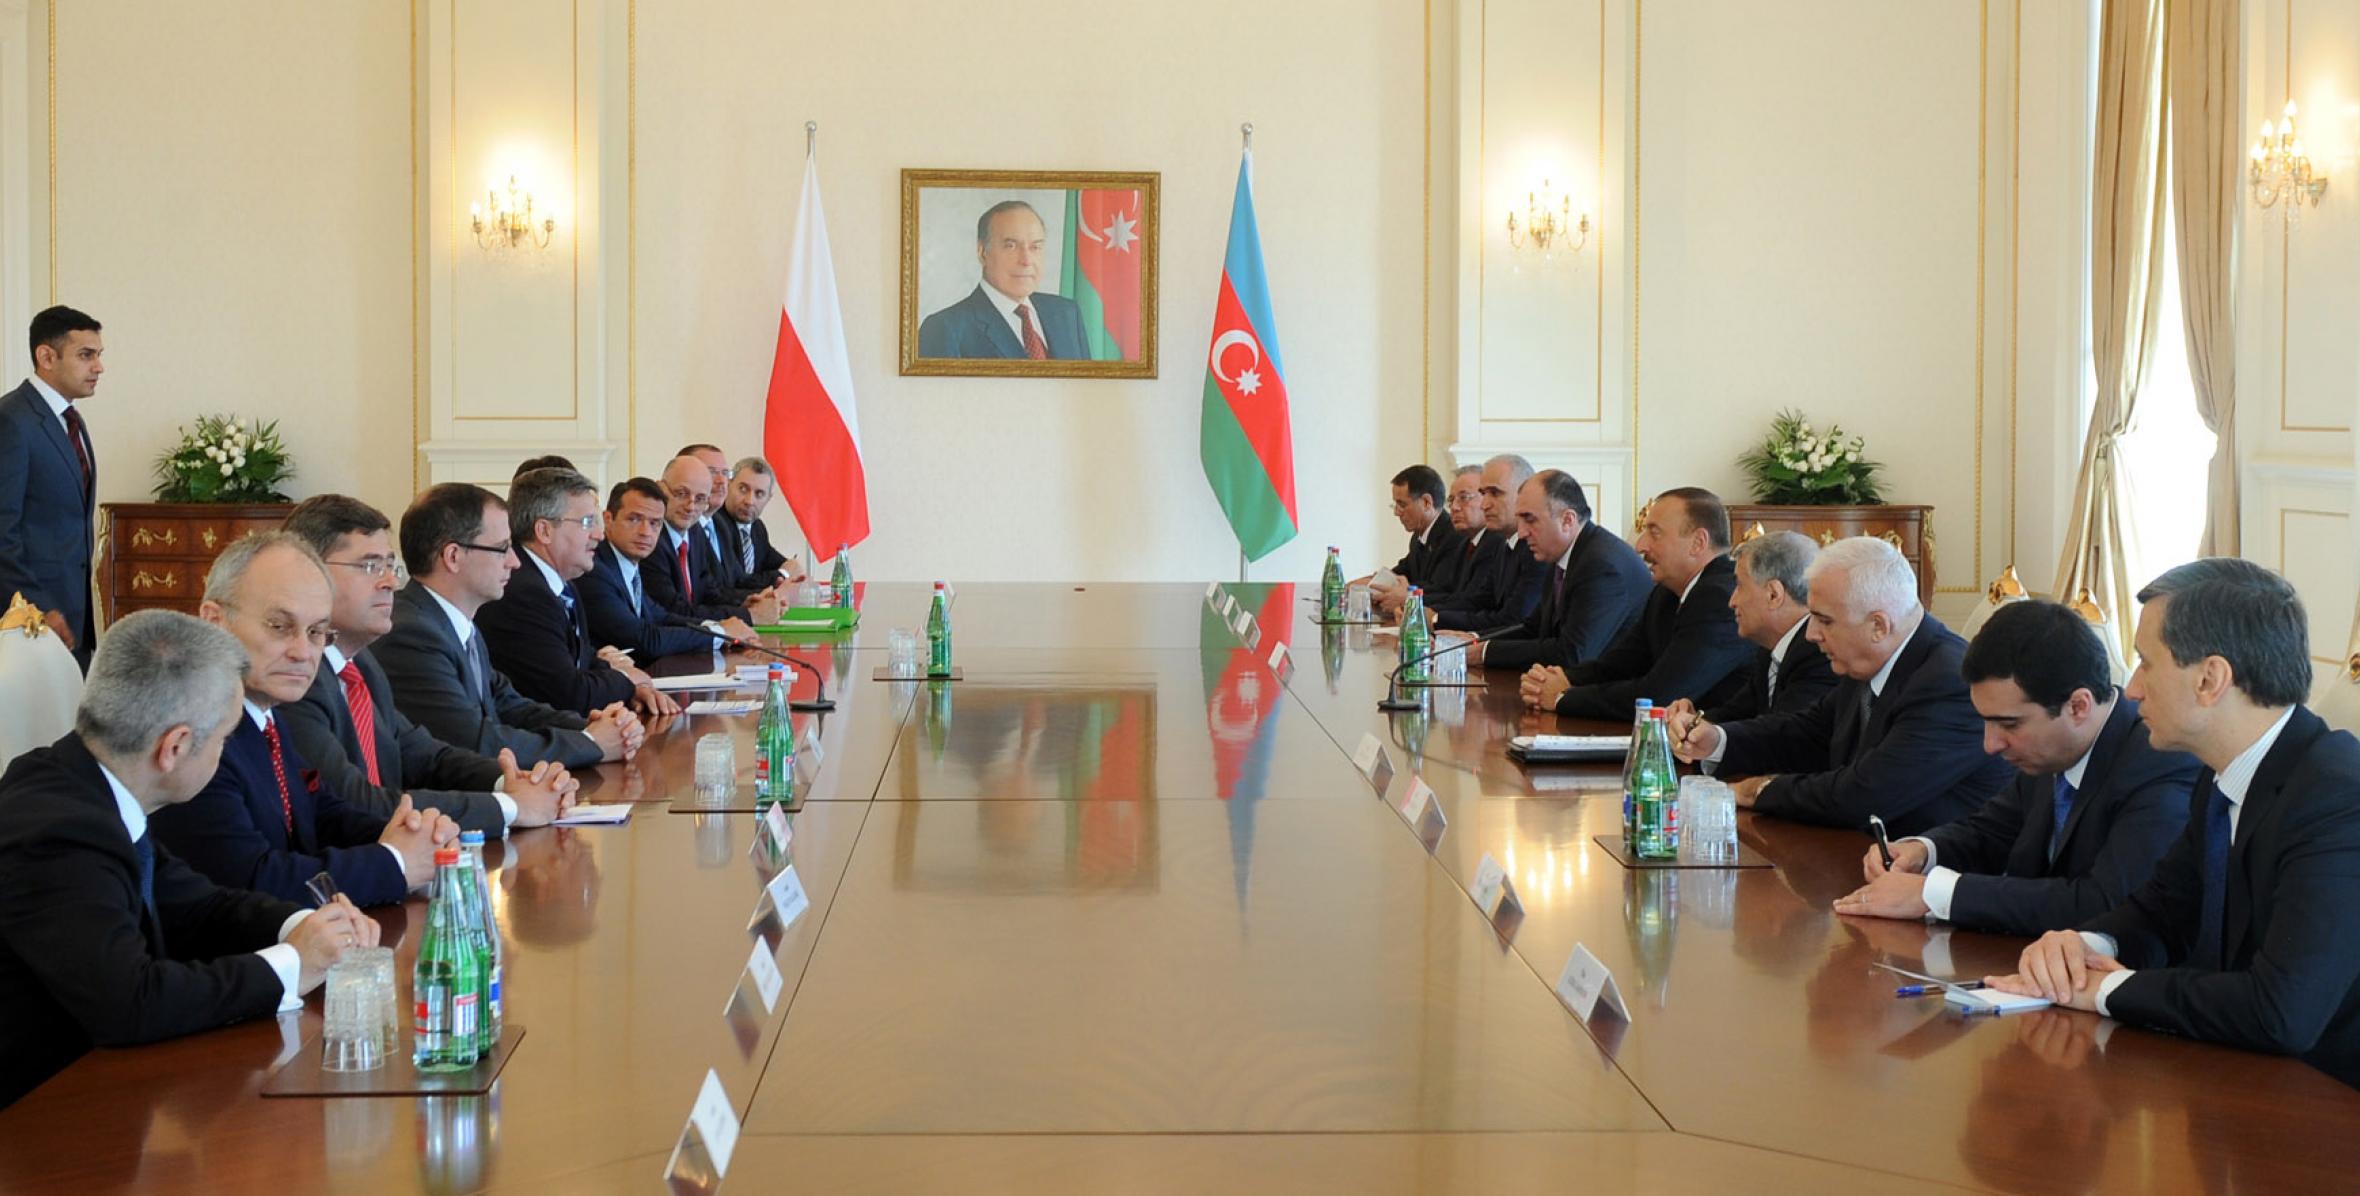 Heads of state held talks in an expanded format